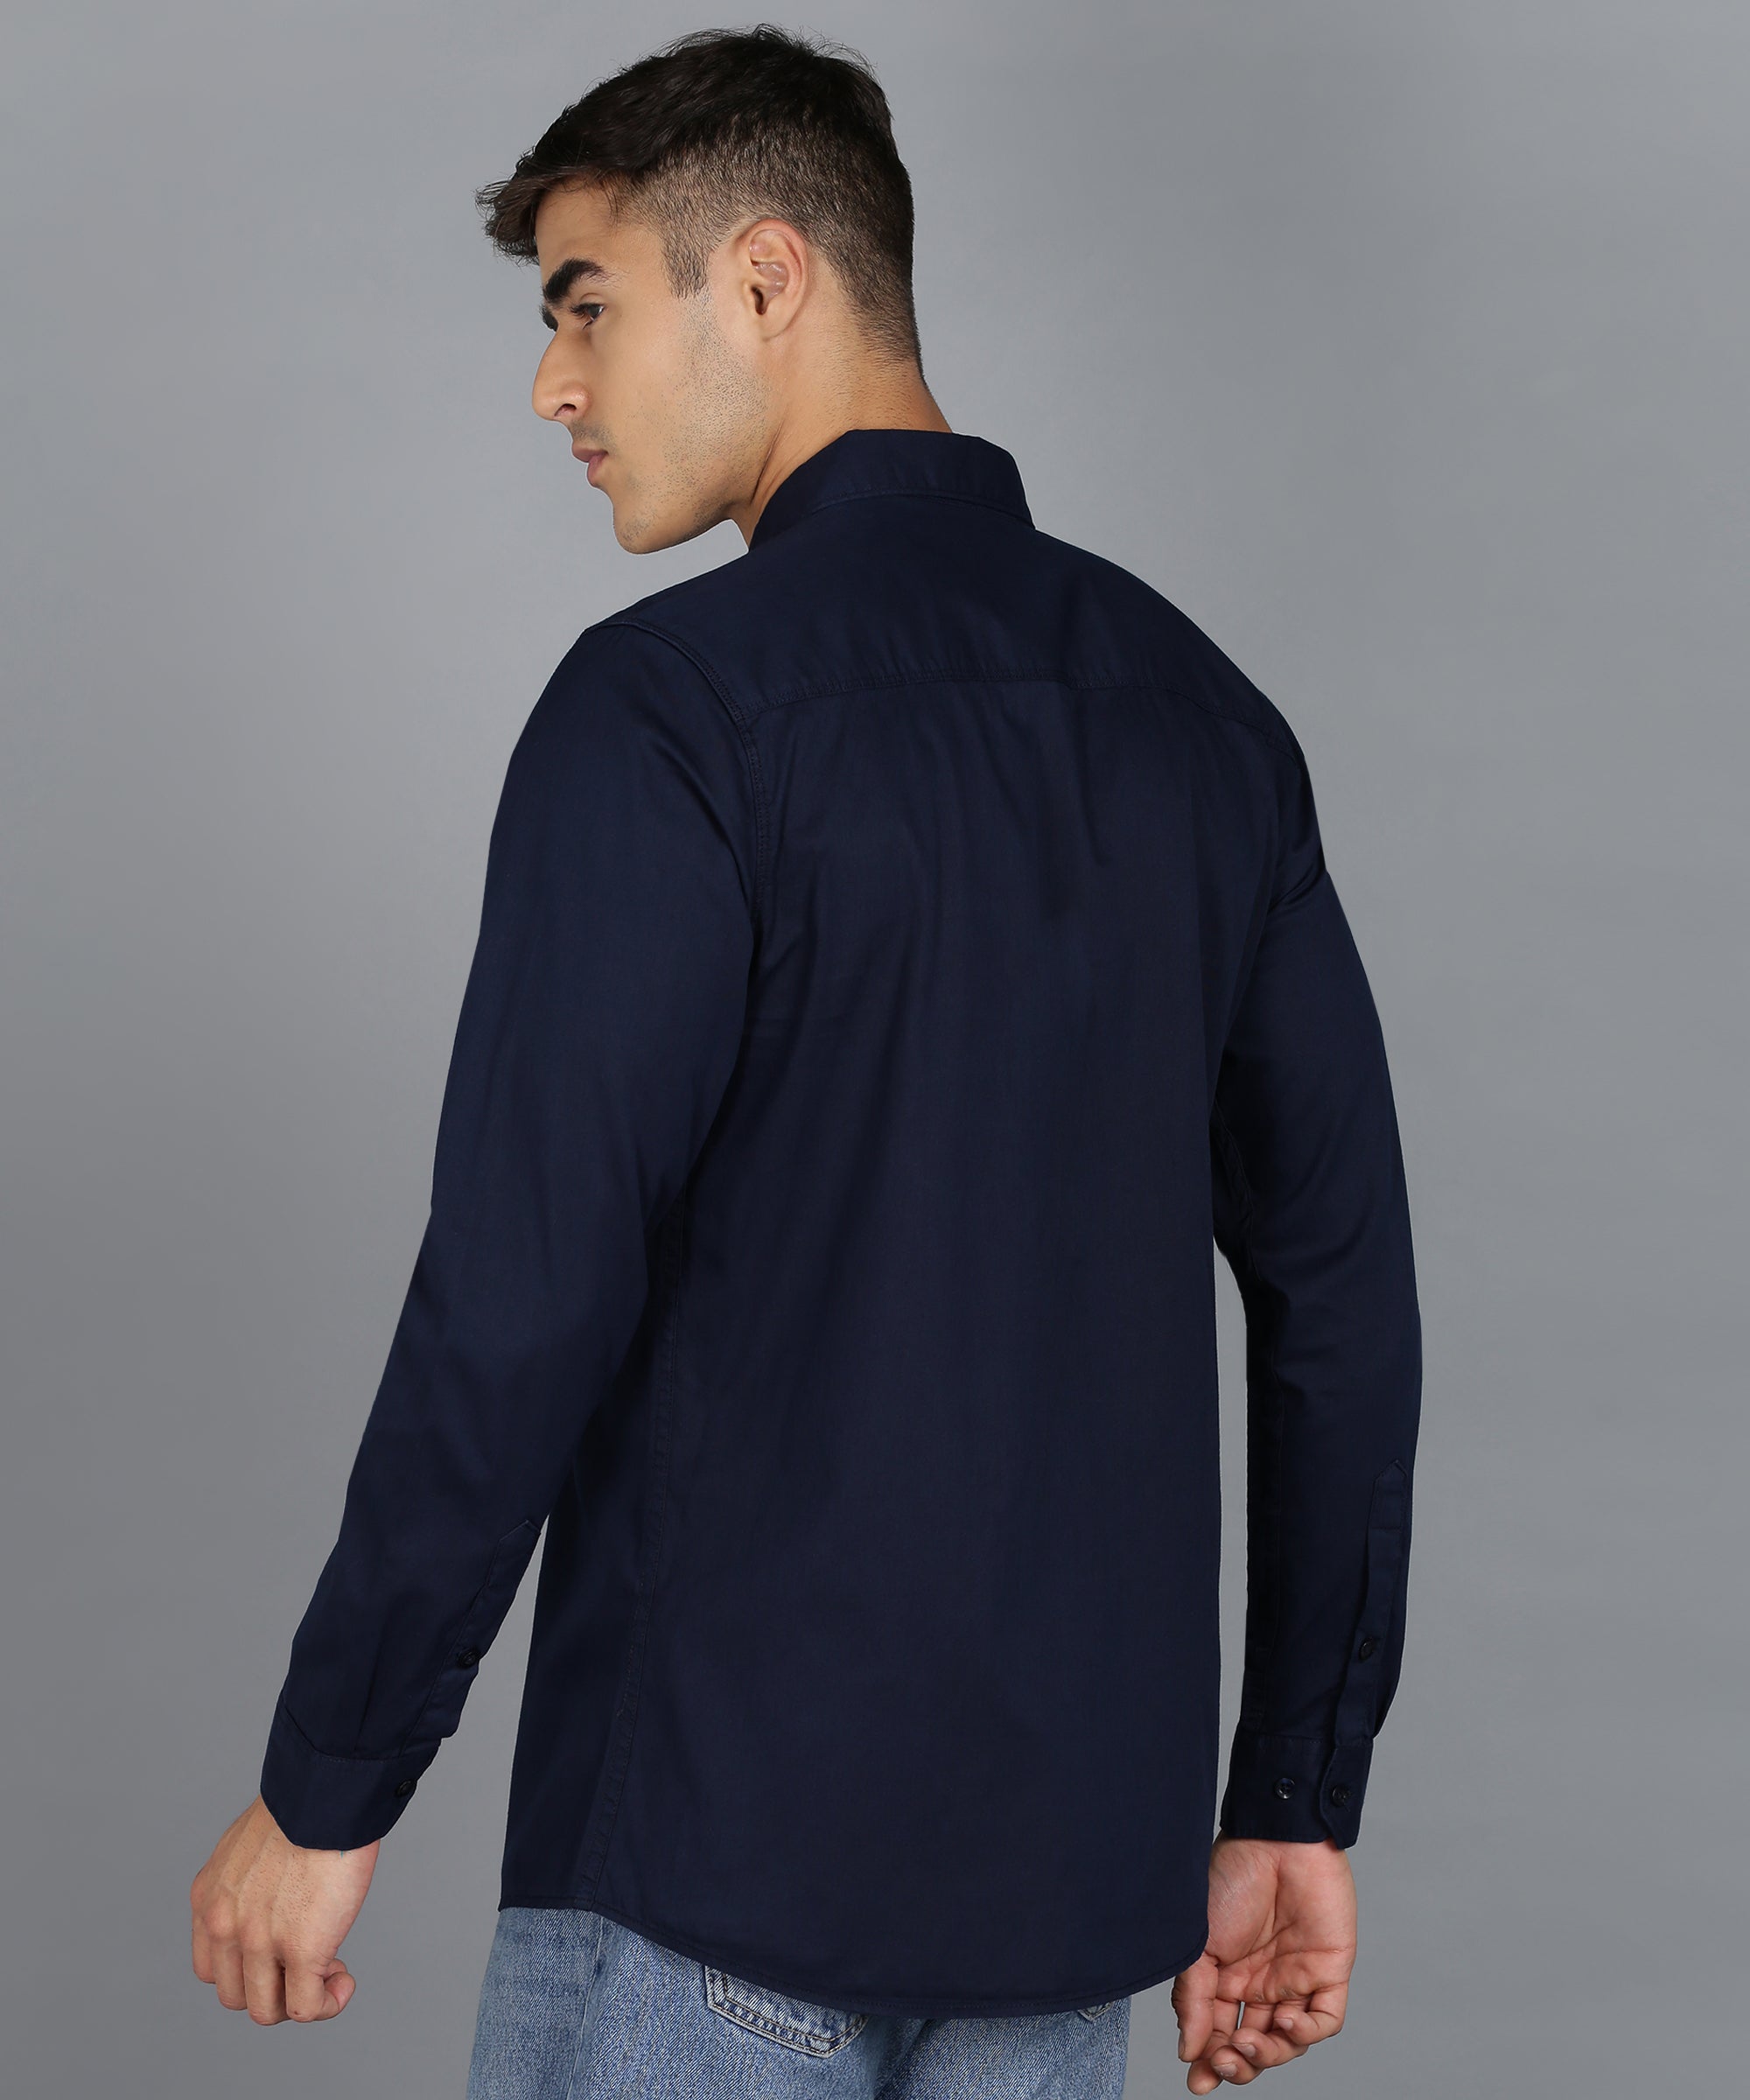 Men's Navy Blue Cotton Full Sleeve Slim Fit Casual Solid Shirt